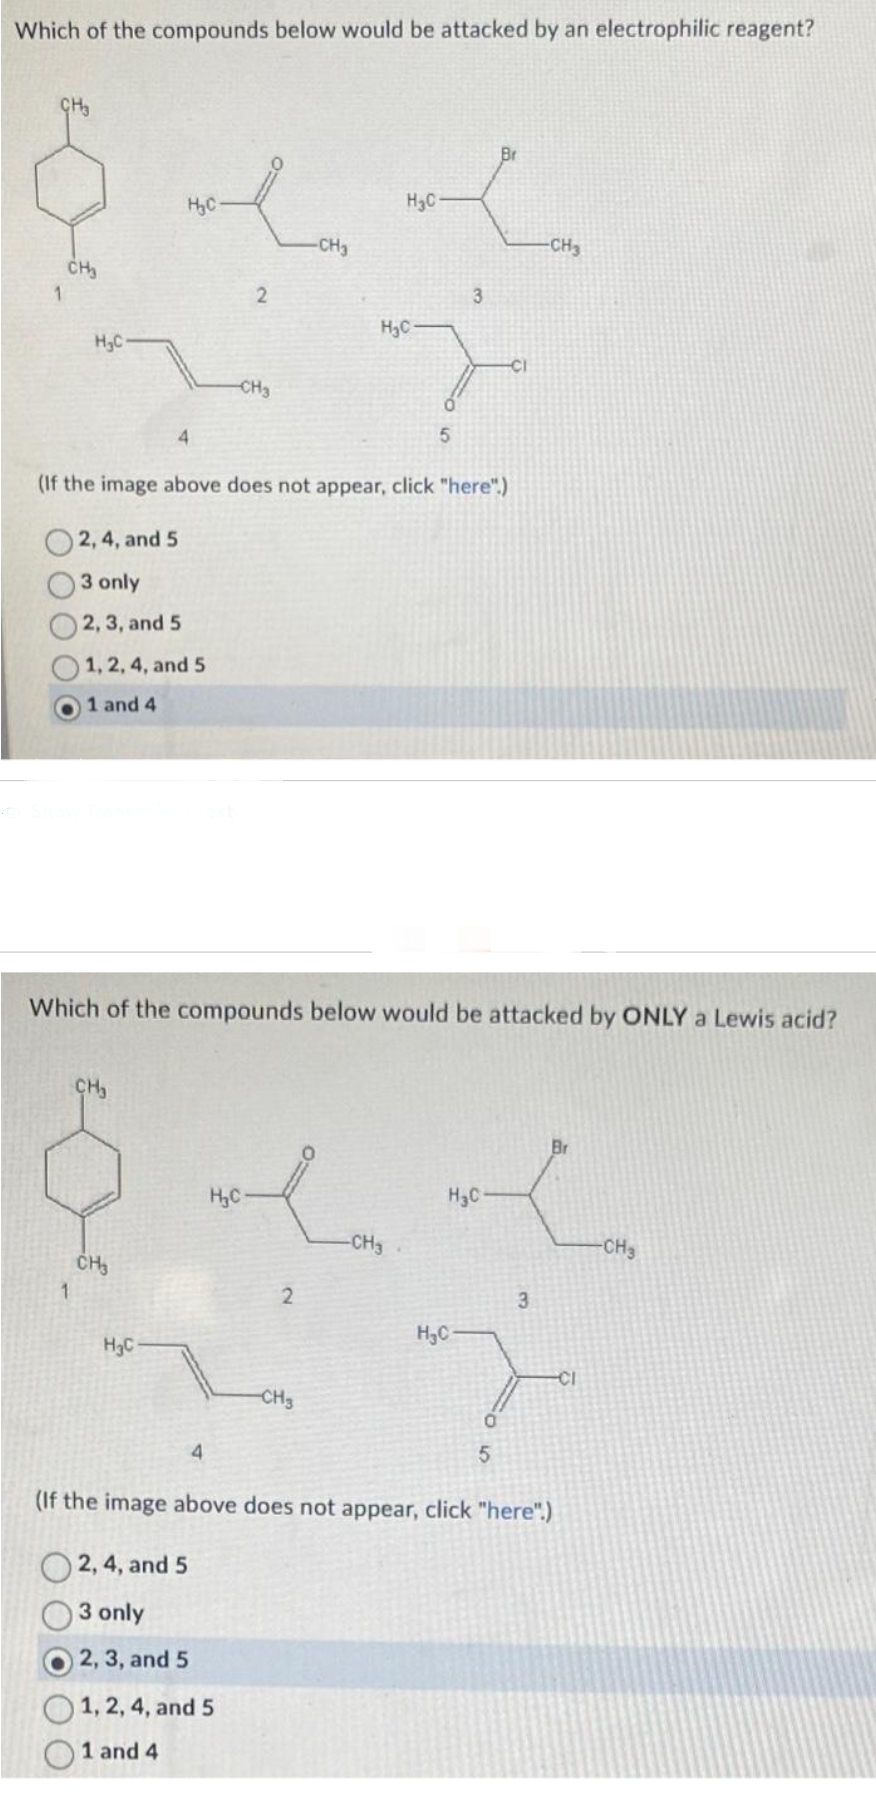 Which of the compounds below would be attacked by an electrophilic reagent?
CH3
1
CH₂
H₂C
1
H₂C
1, 2, 4, and 5
1 and 4
CH₂
4
CH₂
H₂C
4
2
-CH₂
(If the image above does not appear, click "here".)
2, 4, and 5
3 only
2, 3, and 5
H₂C
2, 4, and 5
3 only
2, 3, and 5
1, 2, 4, and 5
1 and 4
-CH₂
Which of the compounds below would be attacked by ONLY a Lewis acid?
2
CH3
H₂C-
H₂C
5
-CH3
3
H₂C
H₂C
Br
-CI
5
-CH₂
3
Br
-CI
(If the image above does not appear, click "here".)
-CH₂